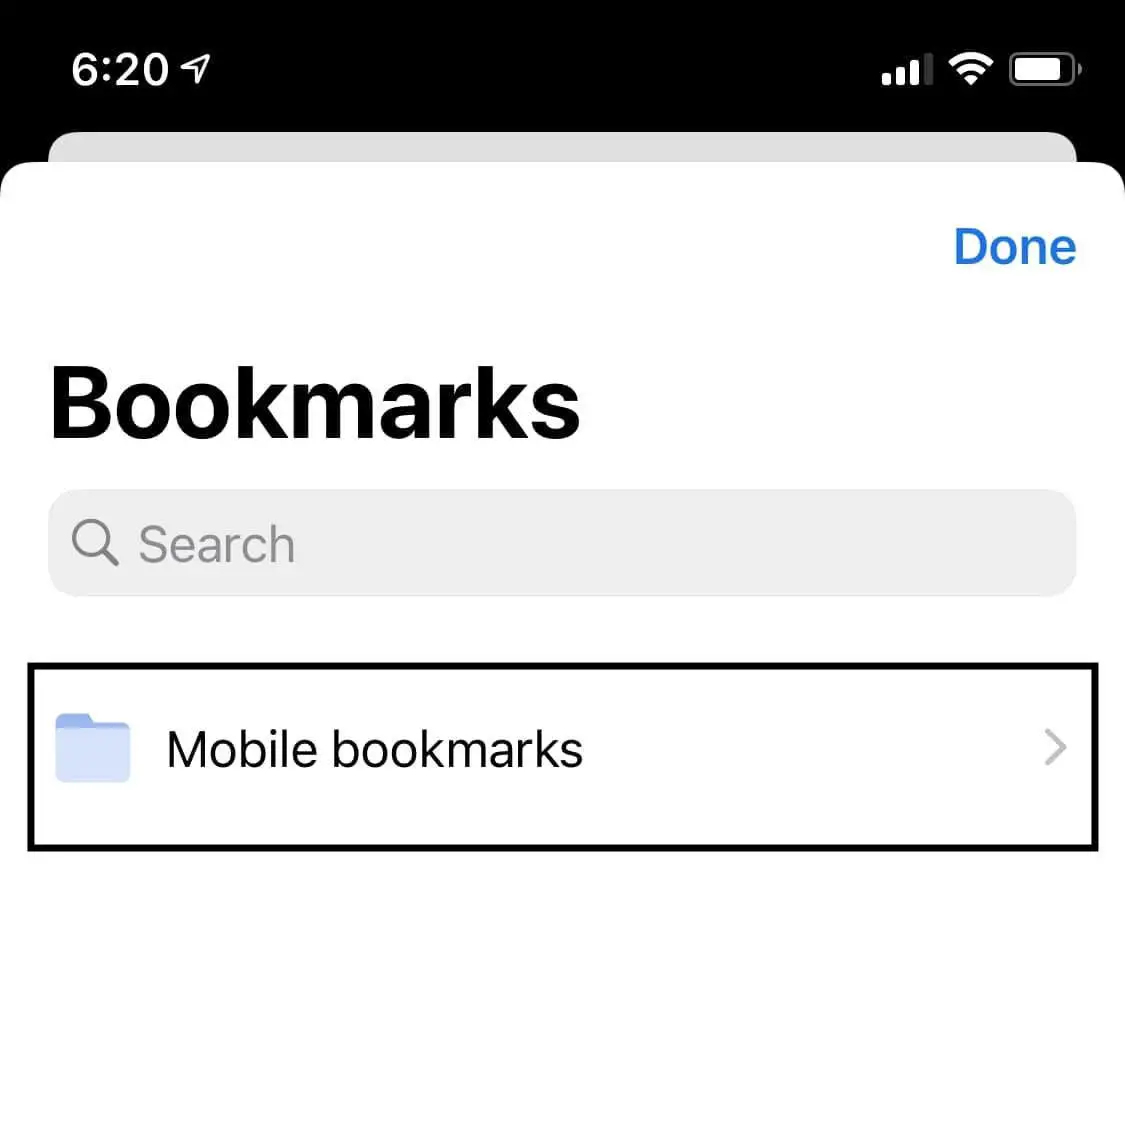 Mobile bookmarks